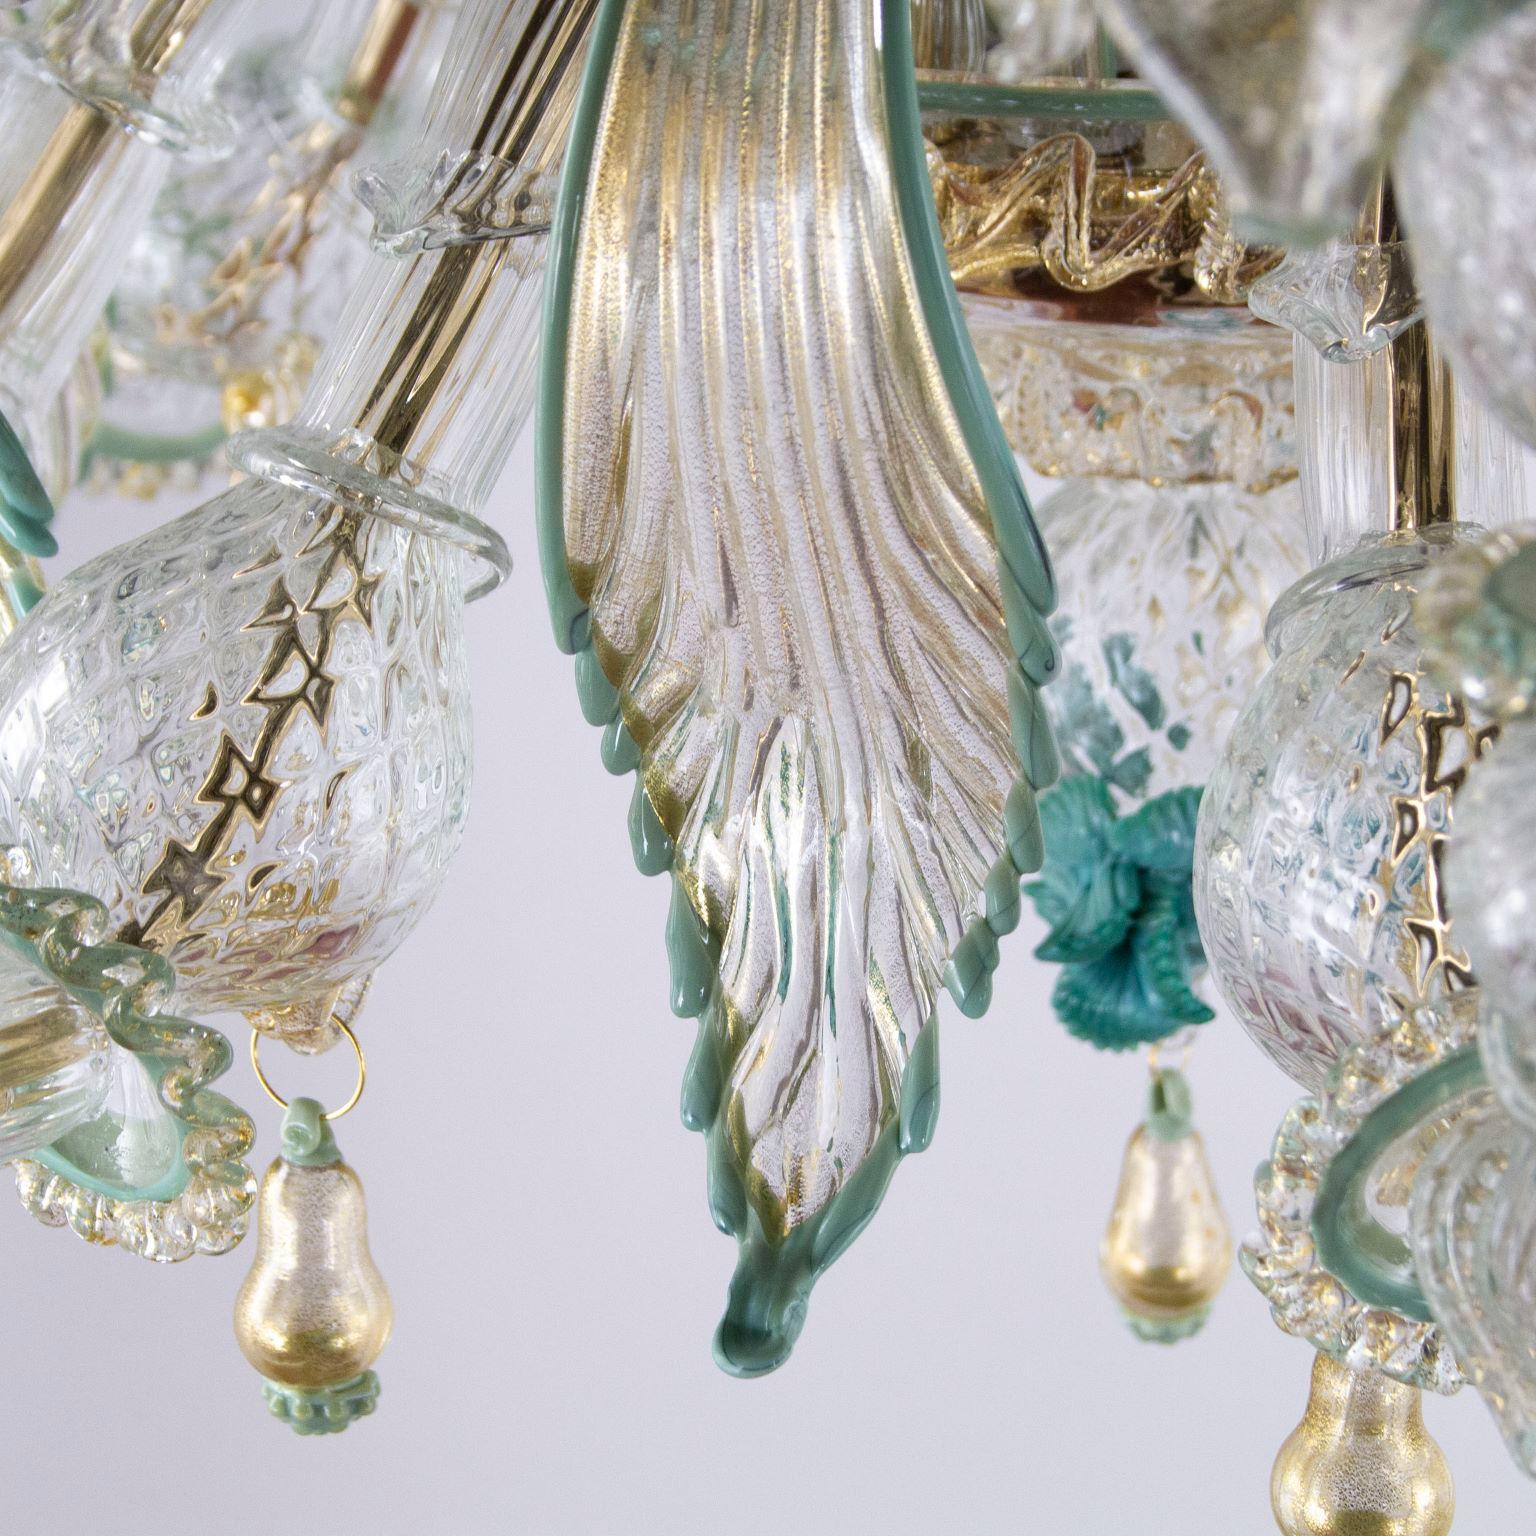 Chandelier Rezzonico 8 Arms, Clear Glass Multicolour Details Multiforme In New Condition For Sale In Trebaseleghe, IT